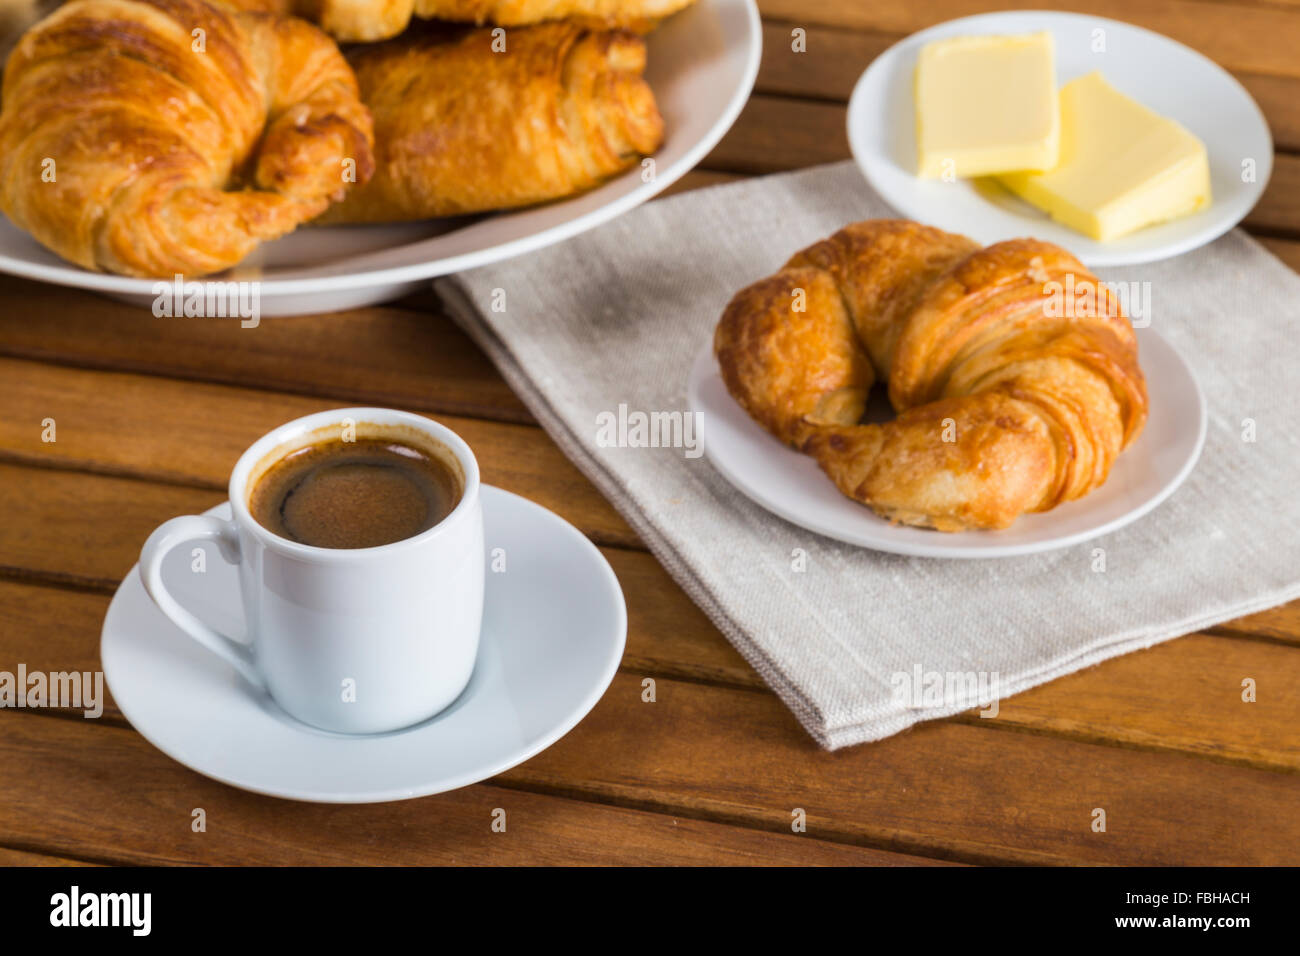 Croissants with butter and coffee Stock Photo